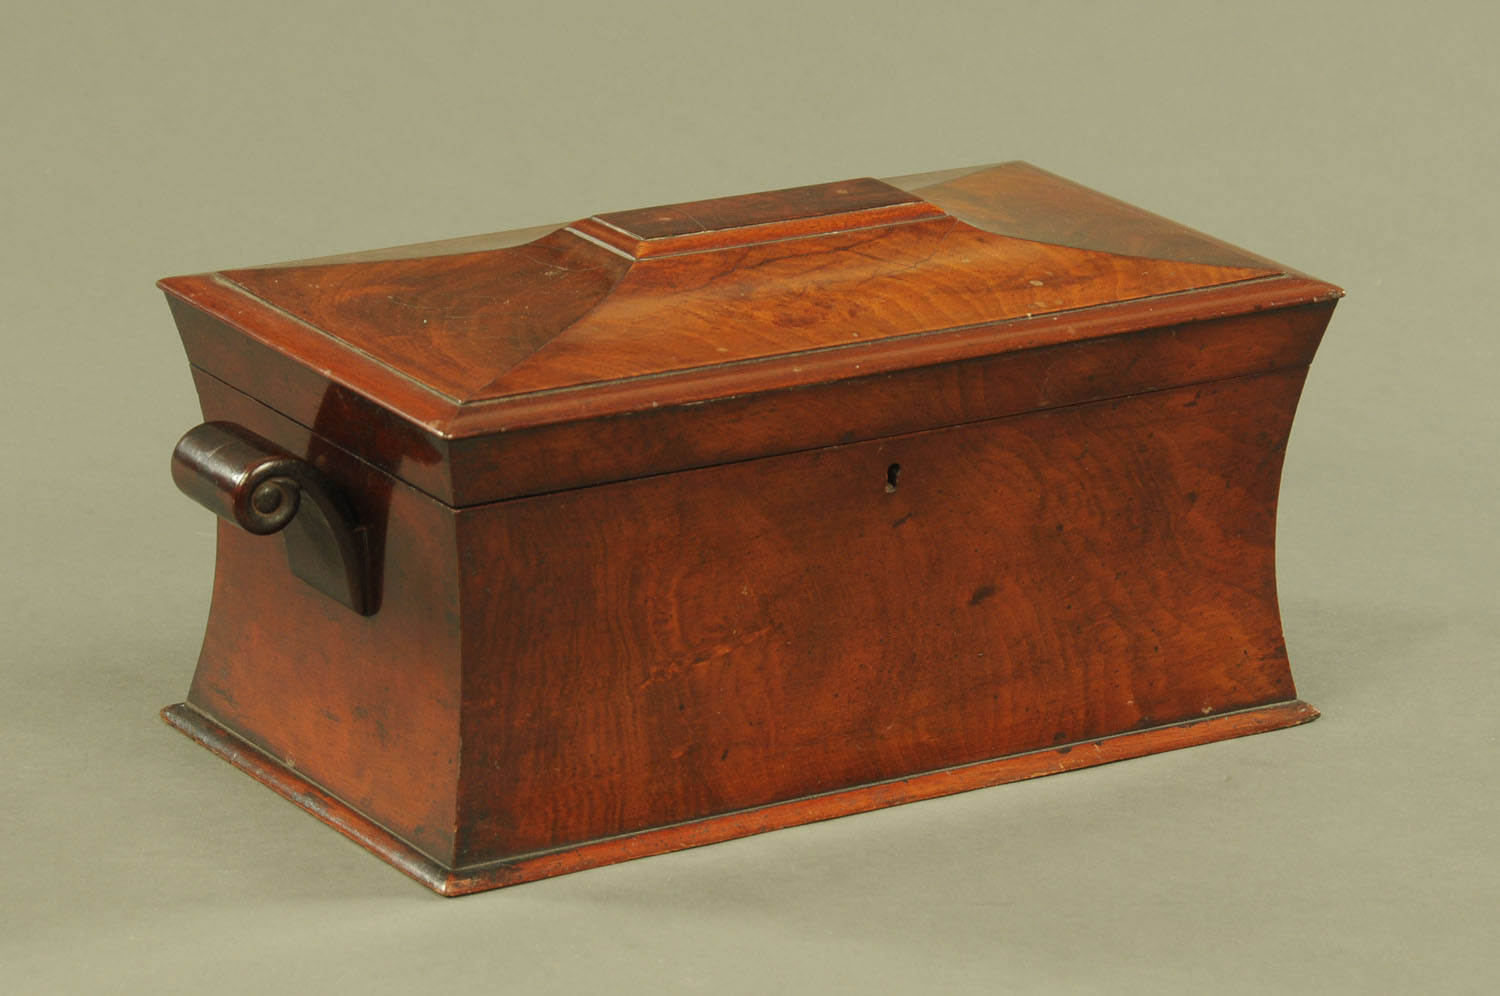 A Regency mahogany sarcophagus shaped tea caddy, with scroll handles and fitted interior.